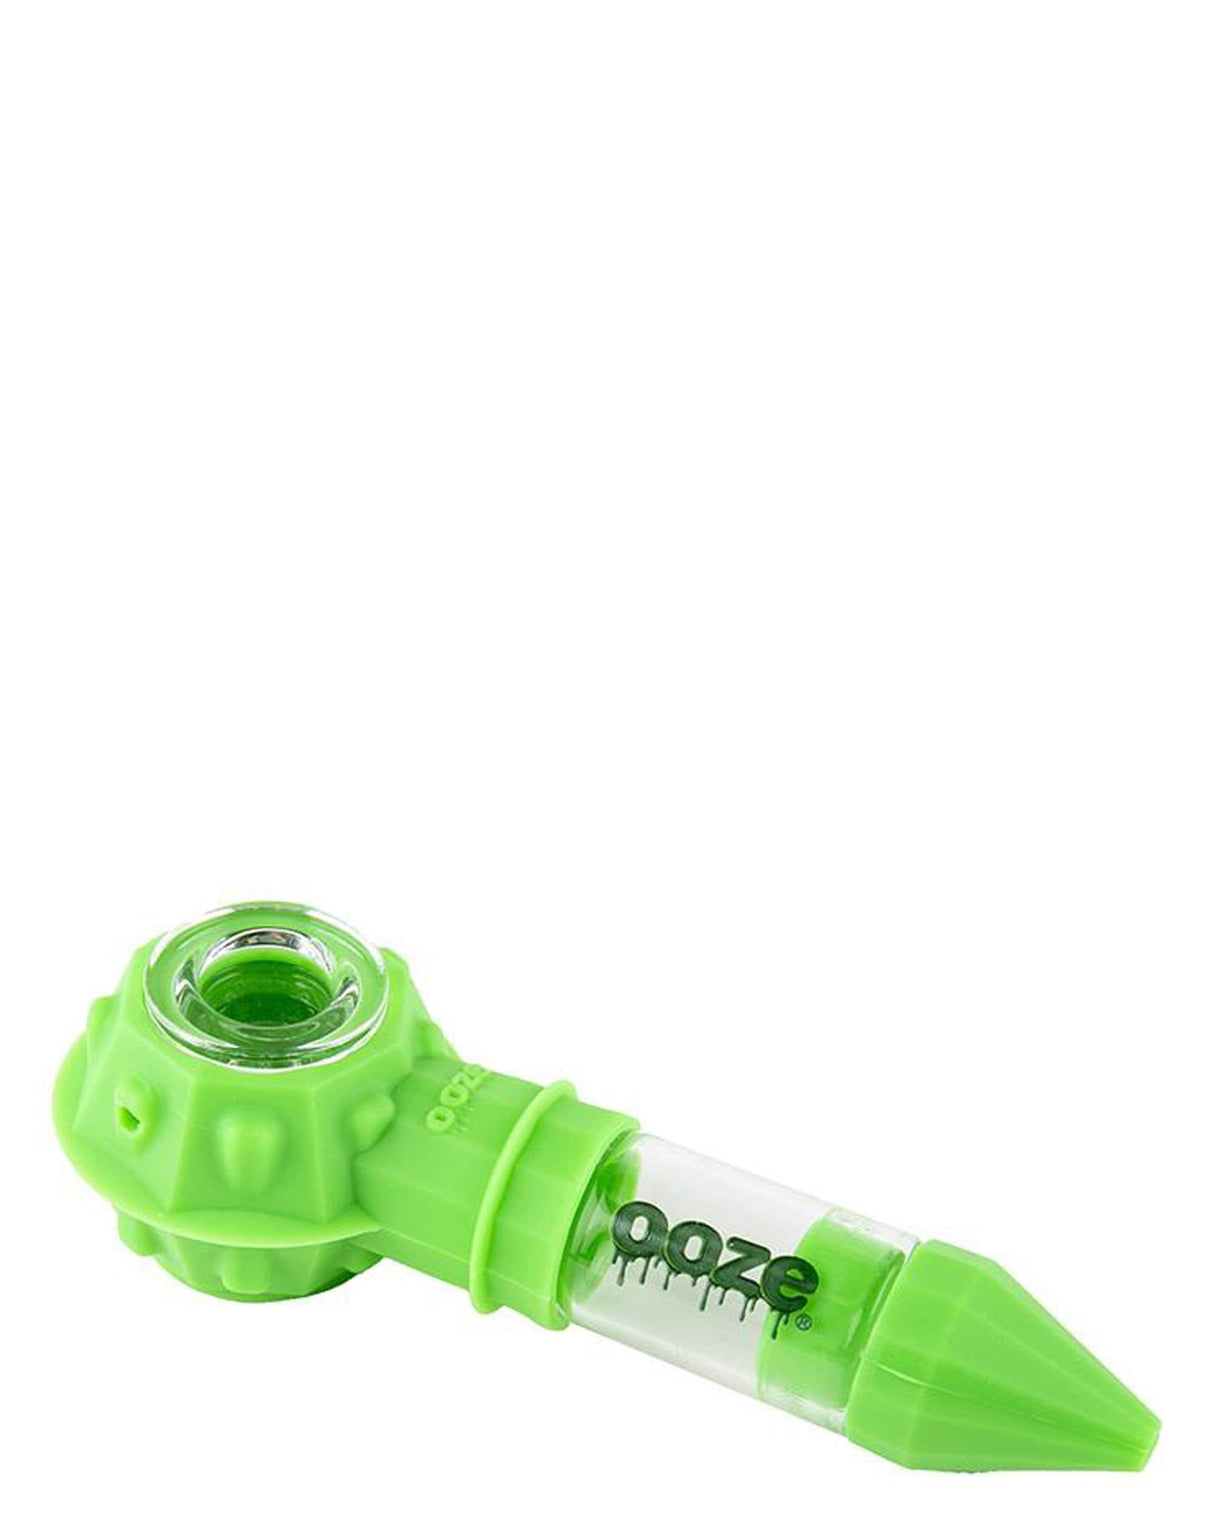 Ooze Bowser Silicone Pipe in green, angled side view, for dry herbs with durable design